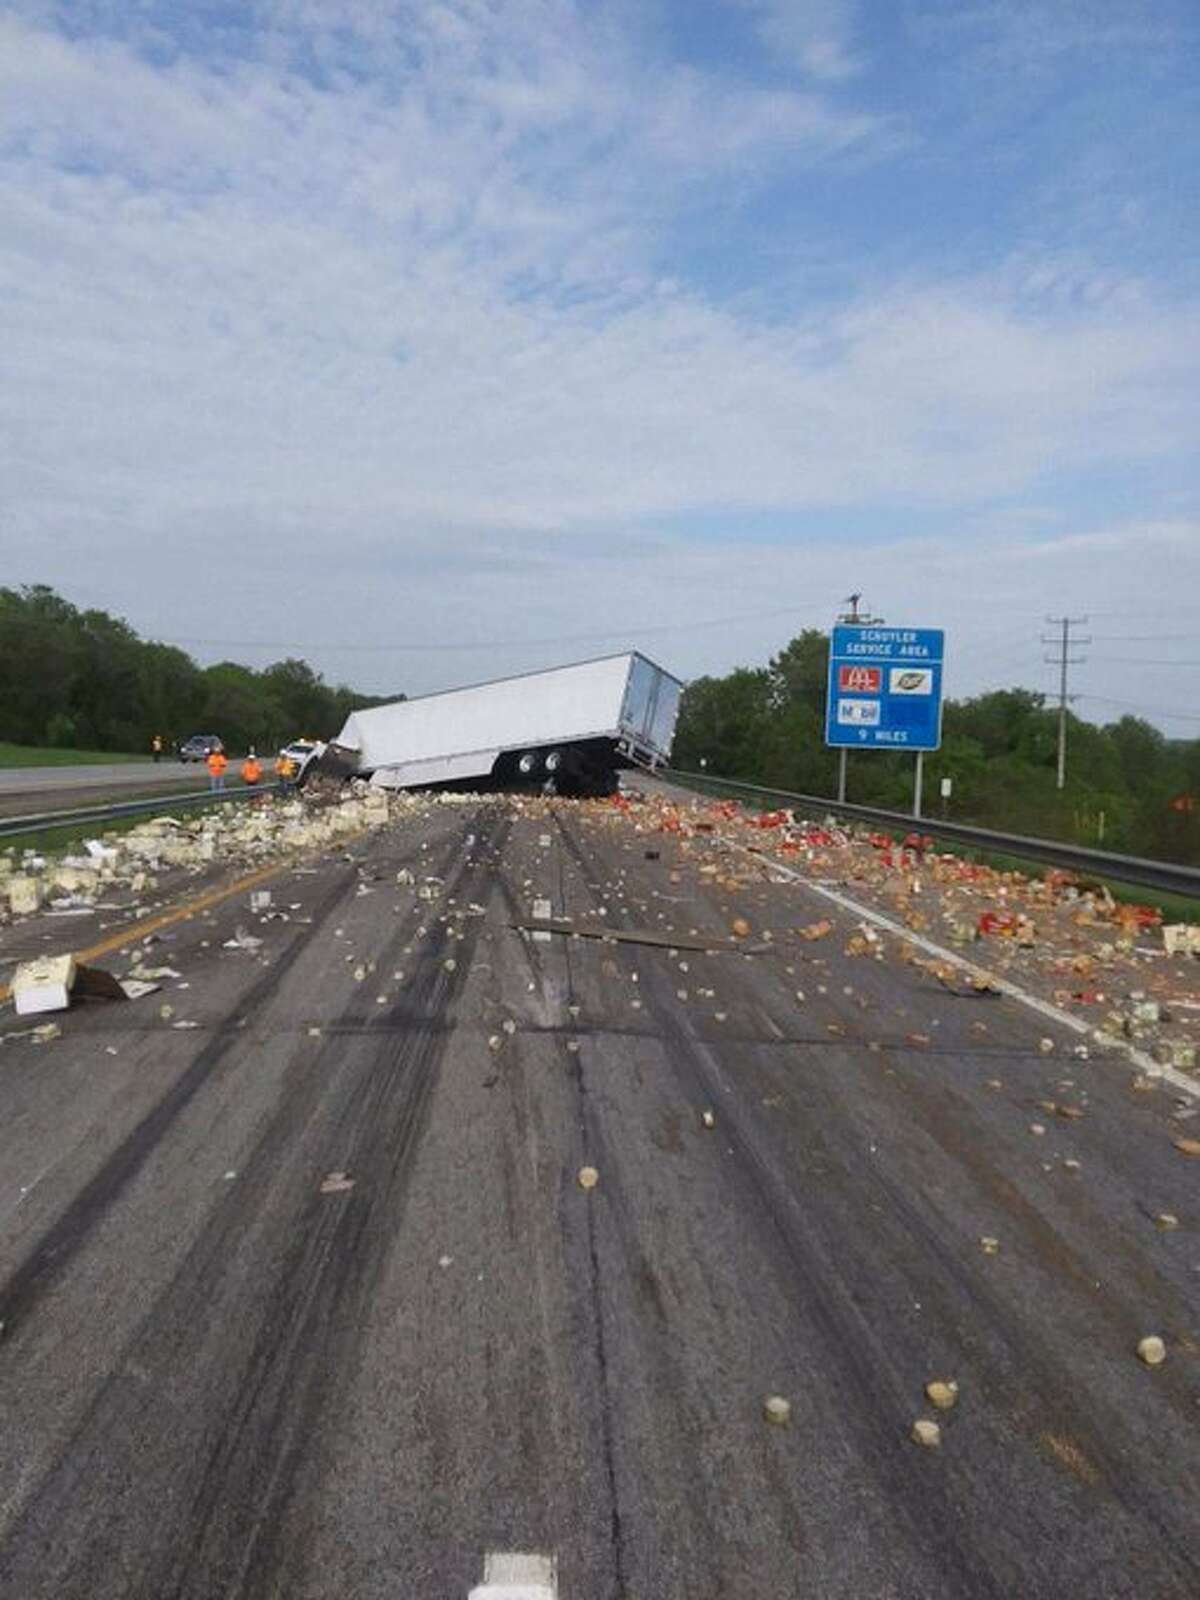 The westbound side of the Thruway is closed in German Flatts and traffic is being diverted off the highway at Exit 29A in Little Falls after a tractor trailer crashed across highway lands and spilled its cargo, State Police said.